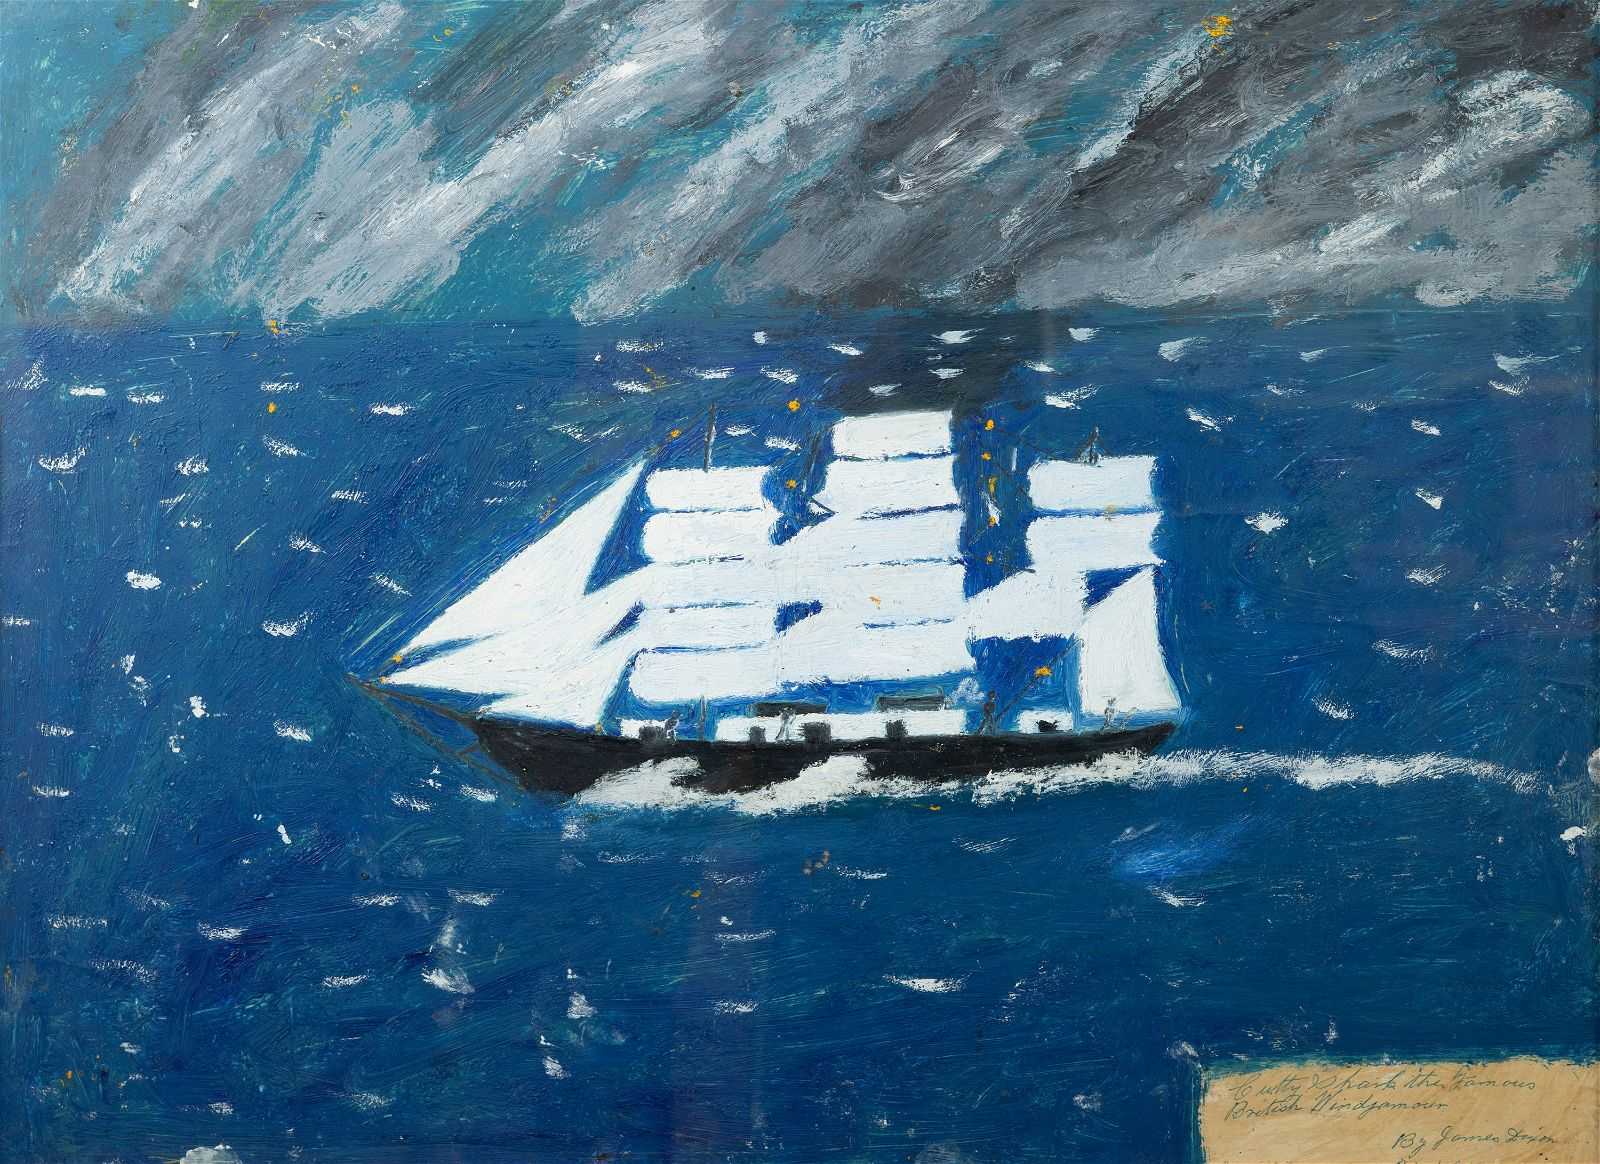 James Dixon&#8217;s &#8216;Cutty Sark&#8217; leads our five auction highlights